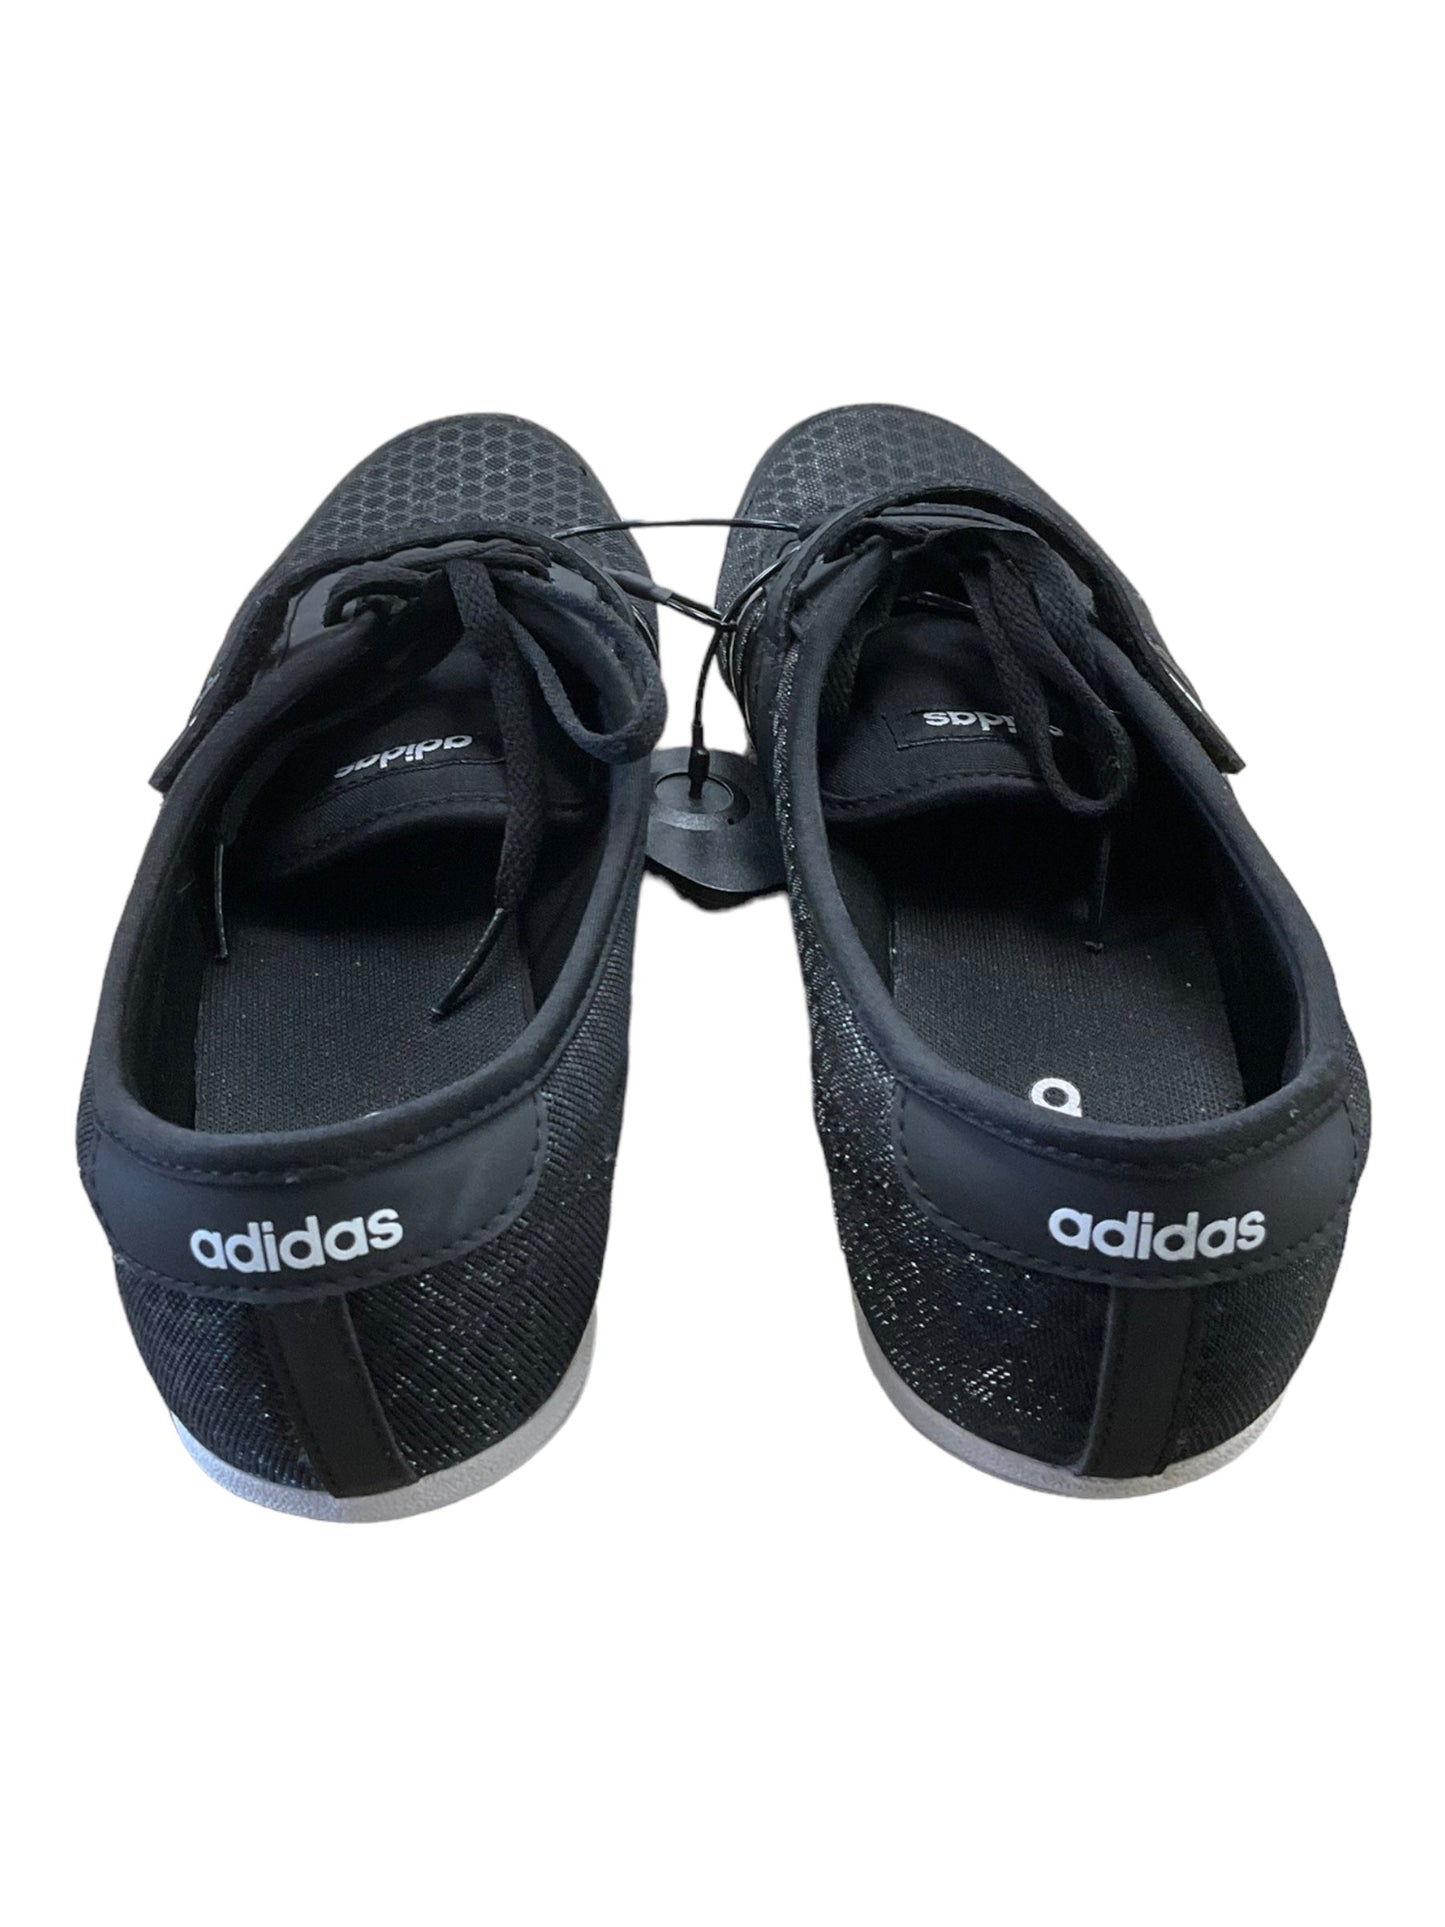 Shoes Sneakers By Adidas  Size: 8.5